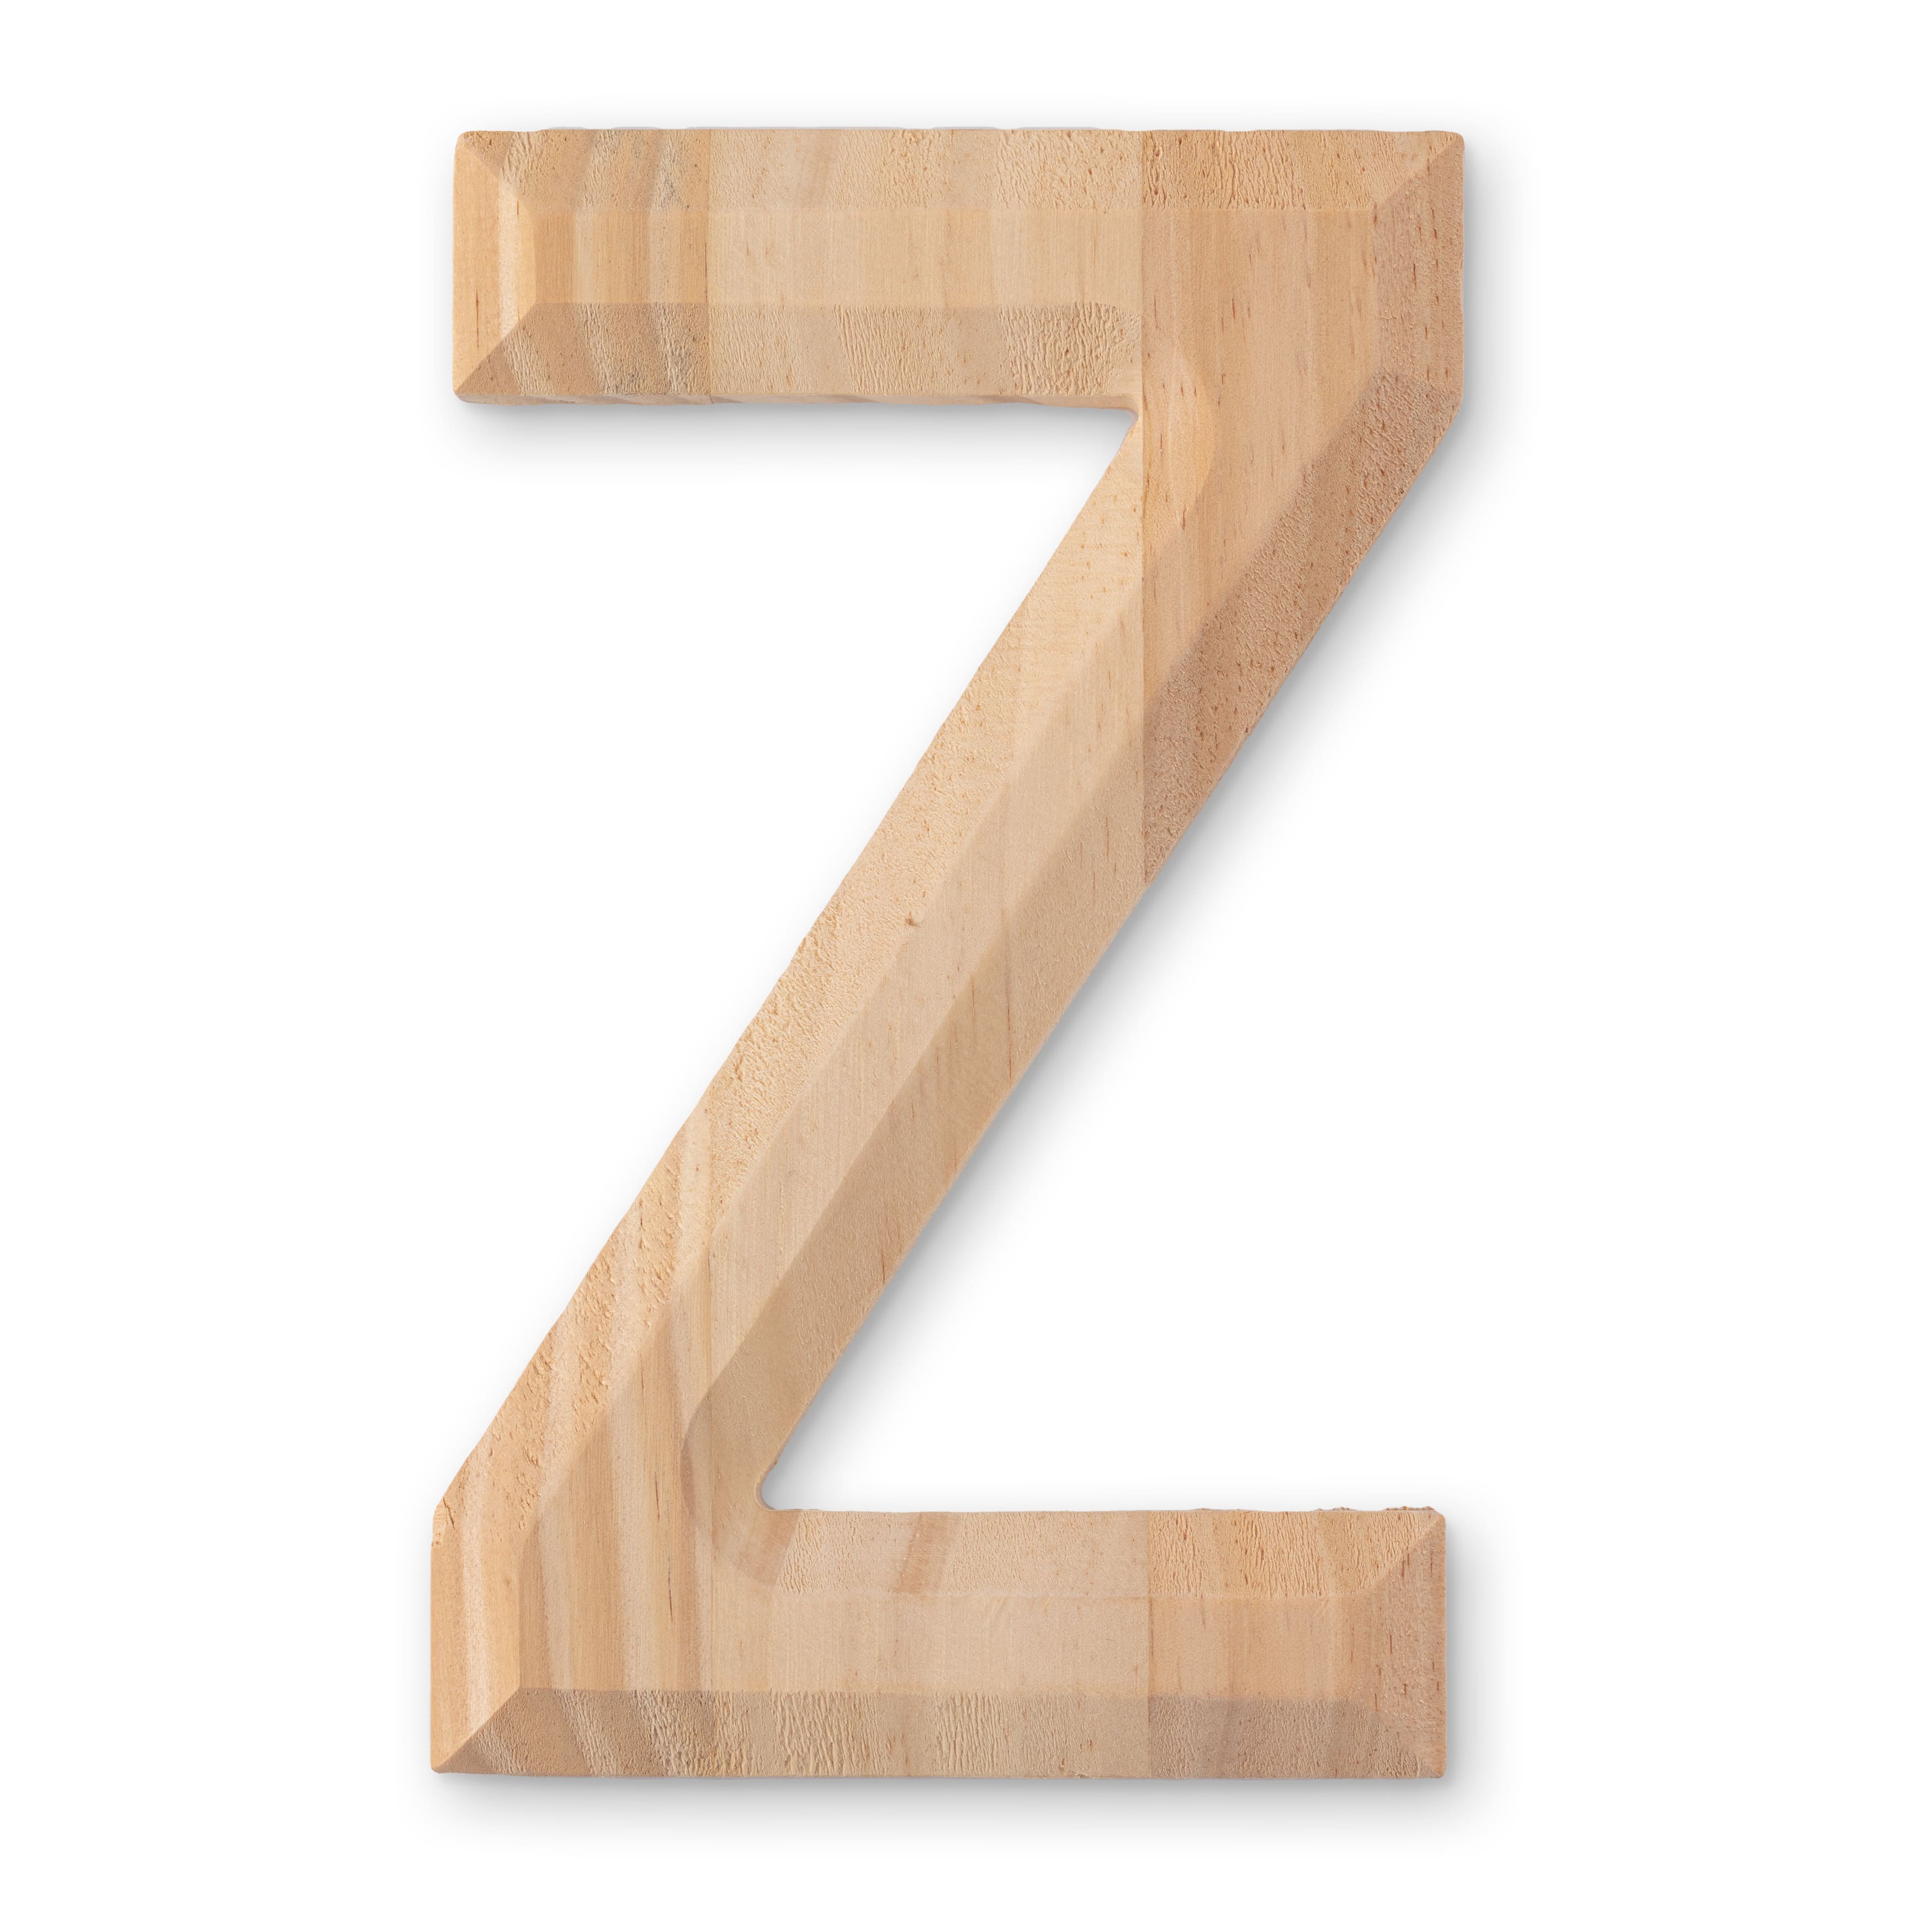 2-Inch Decorative Wooden Letter Y - Alphabet Letters for DIY Wall Signs,  Table & Shelf Decorations - Wood Letters for Crafts & Party Decor